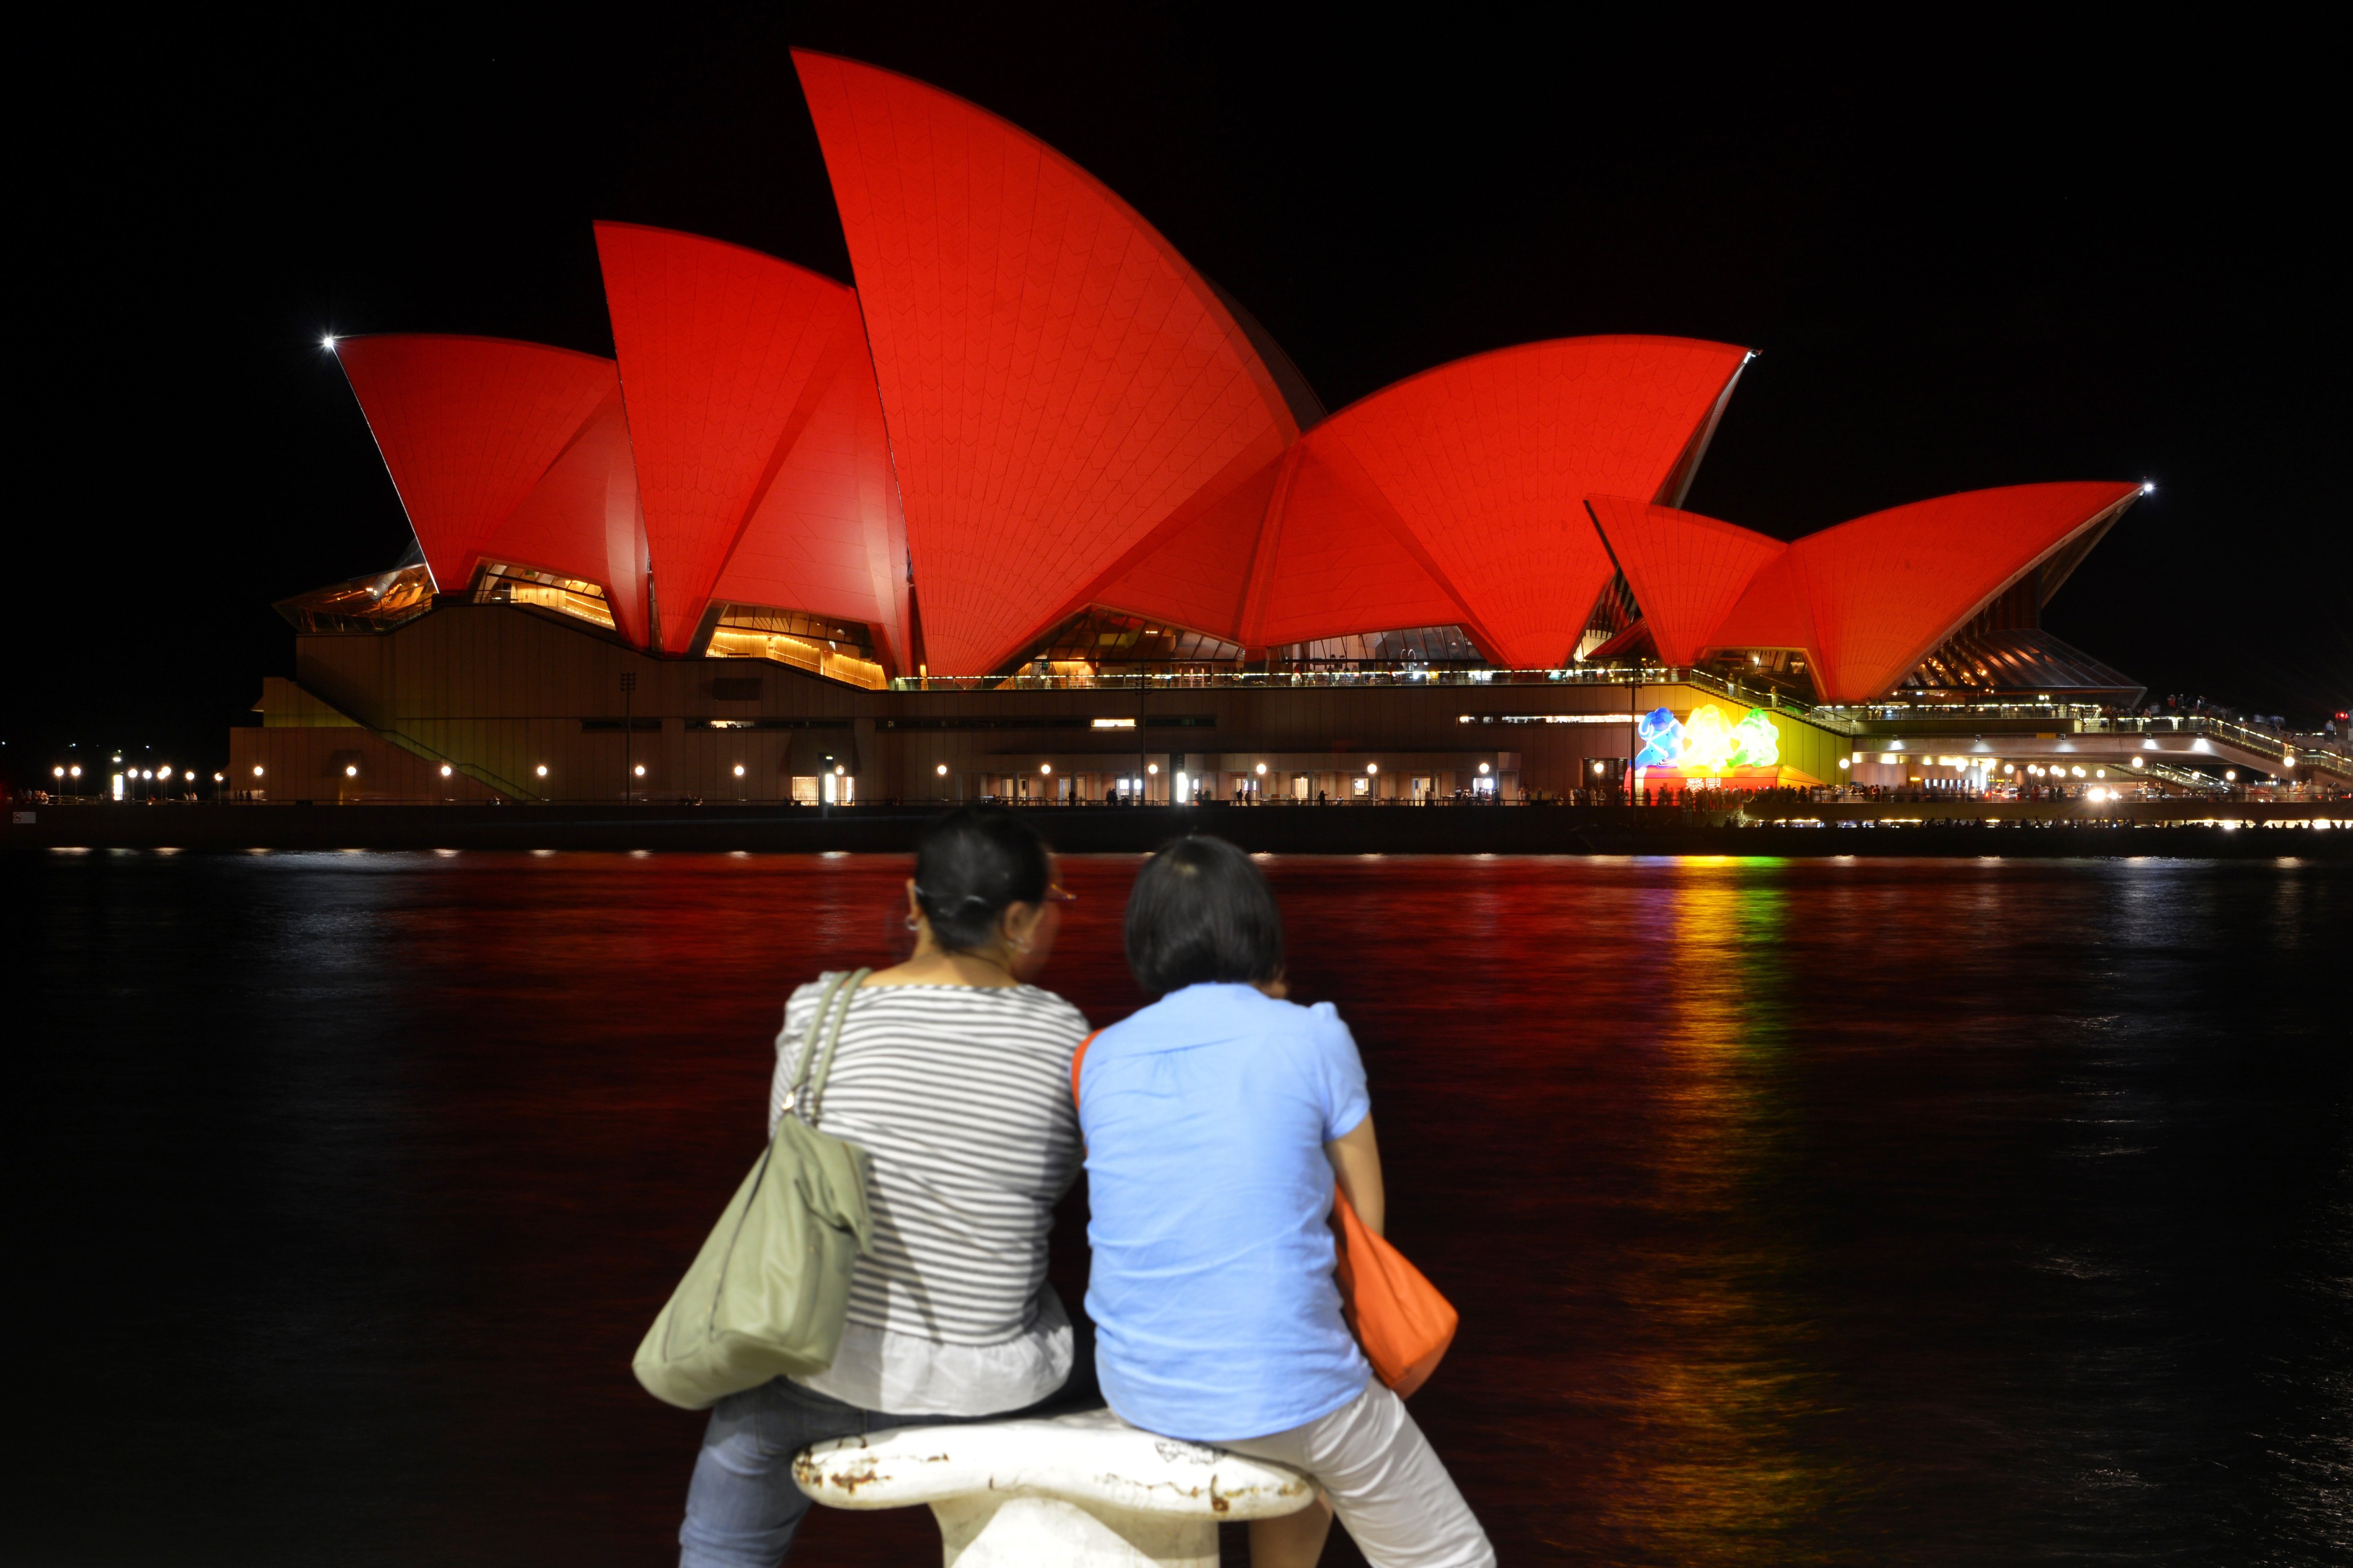 Chinese tourists sit and view the Sydney Opera House, which is lit up in red to welcome in the Lunar New Year, in Sydney on Feb. 8, 2016 (Peter Parks—AFP/Getty Images)